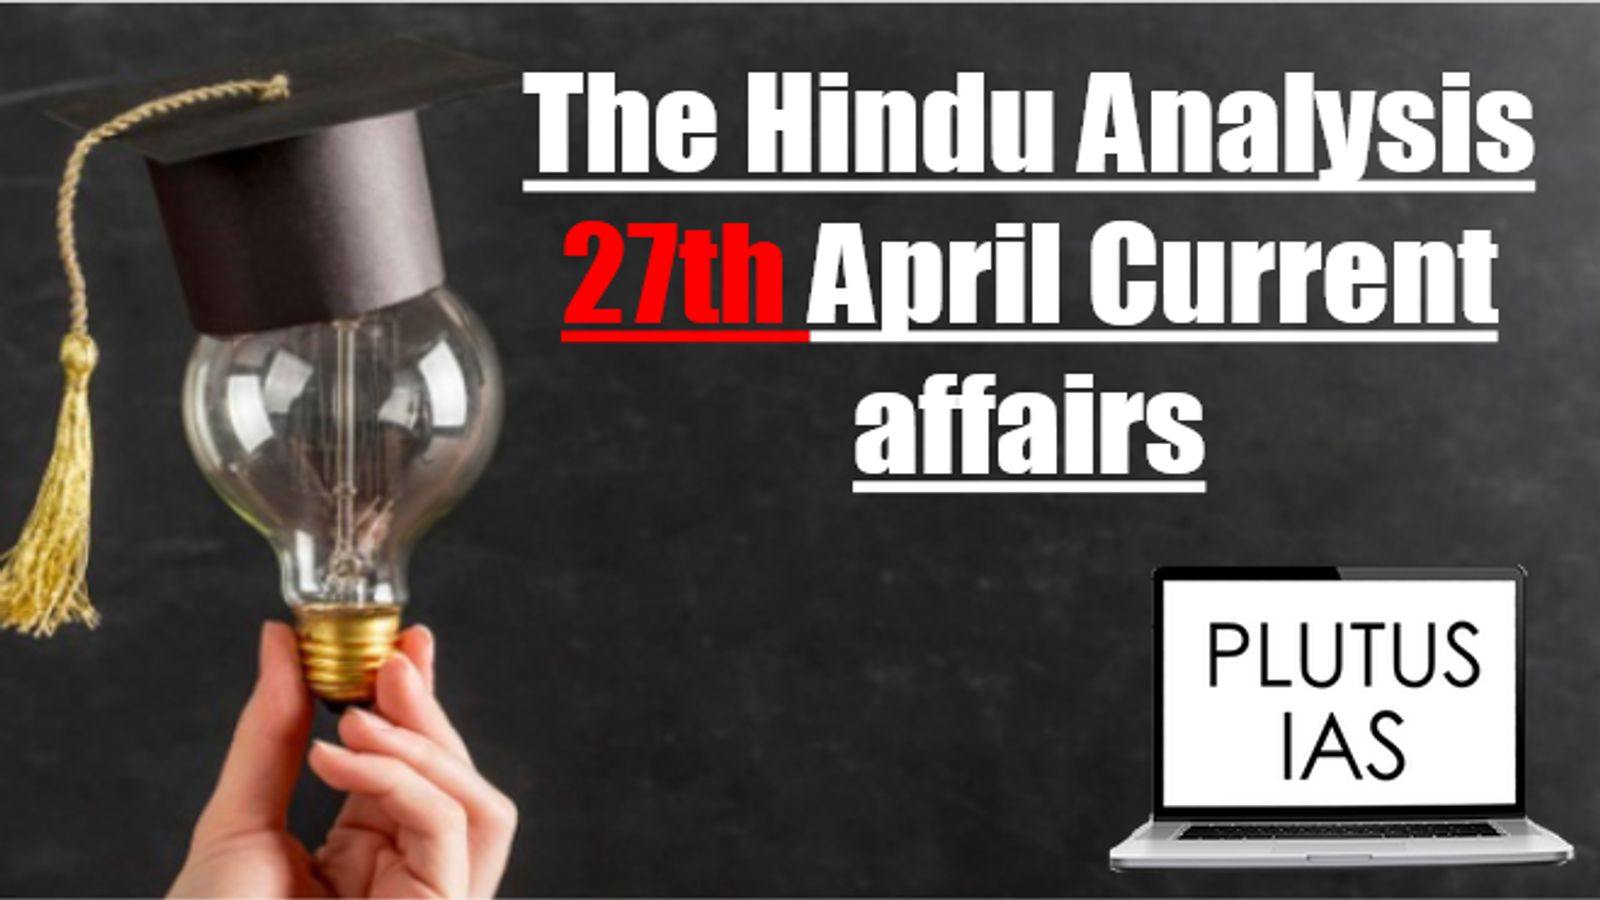 Today Current Affairs 27th April